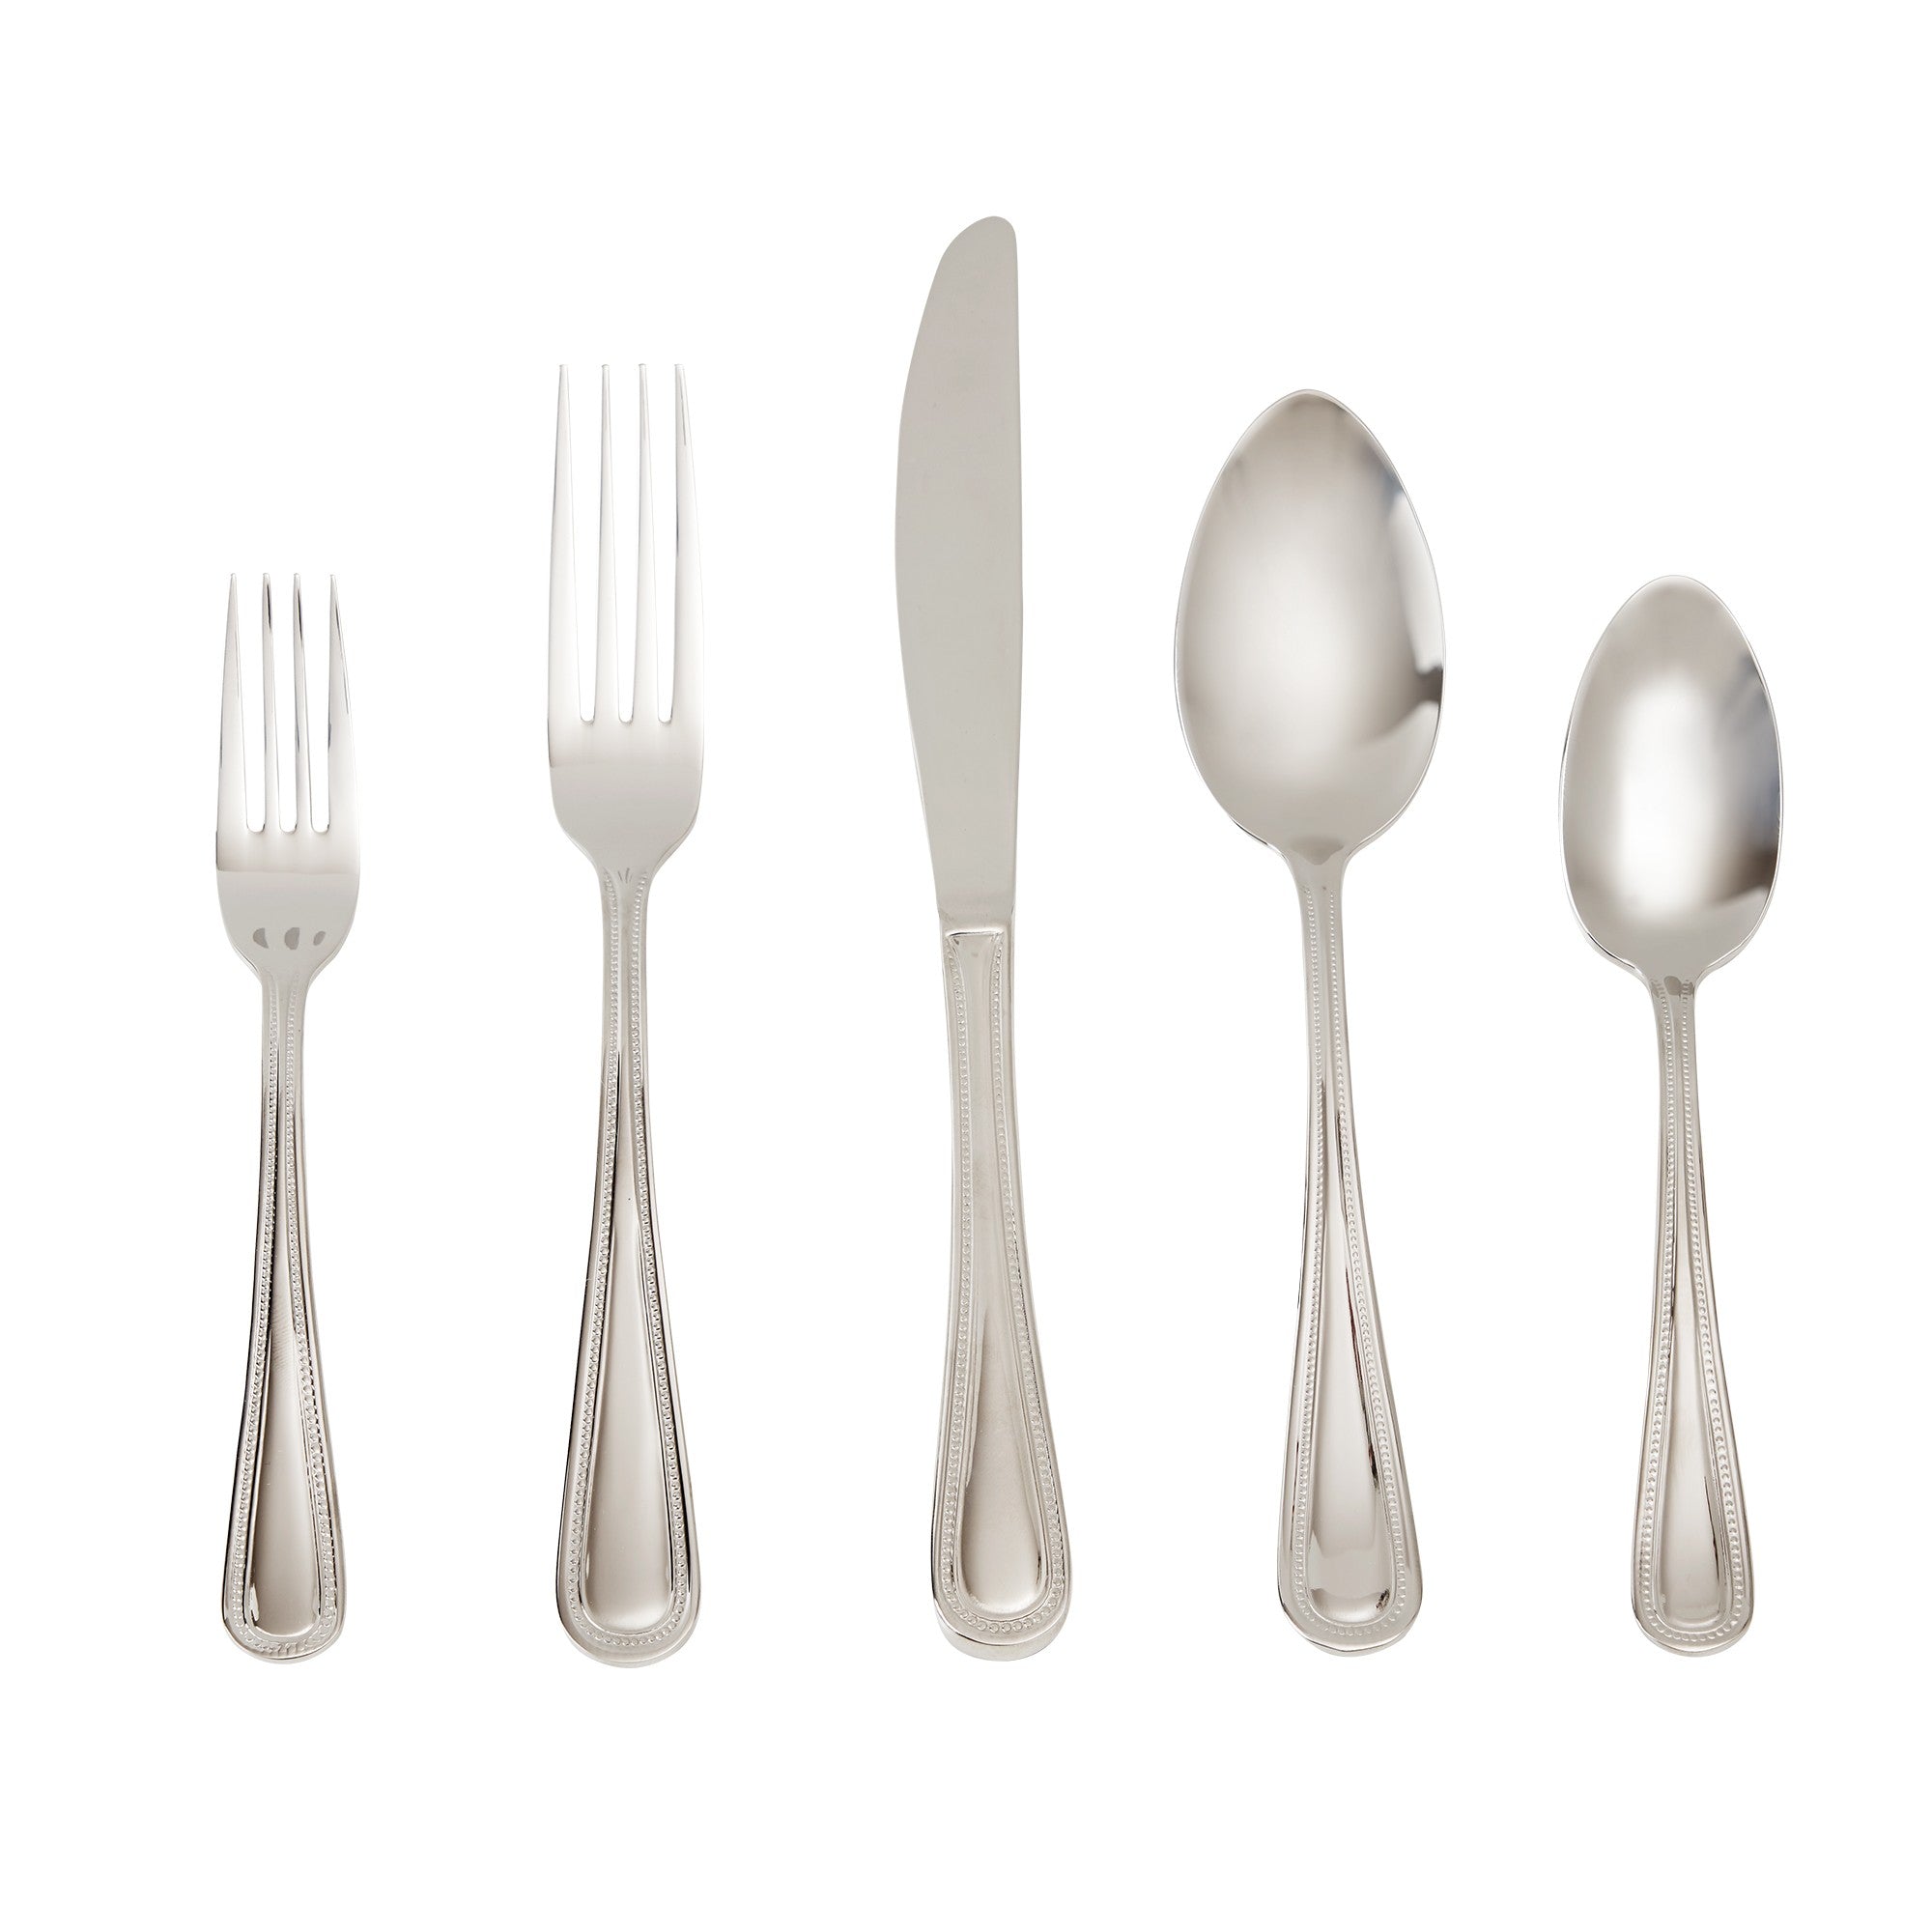 title:Safdie & Co. Flatware Stainless Steel 20PC Set Brighton;color:Silver